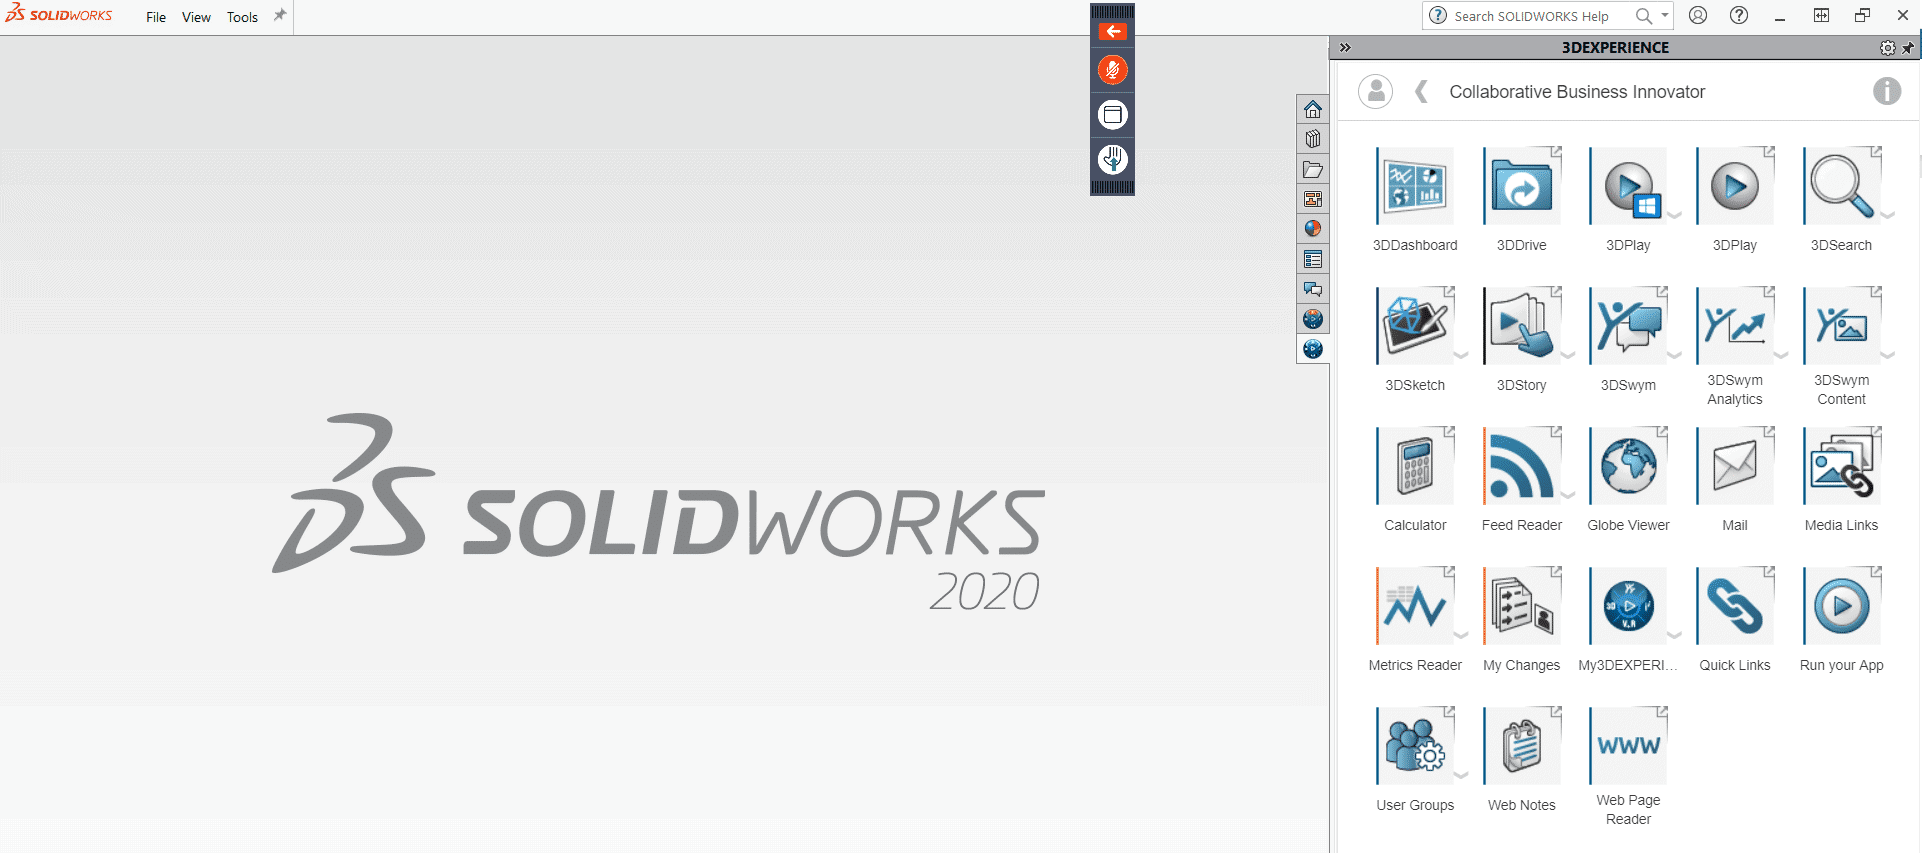 Collaborative Business Innovator in the SOLIDWORKS add-in